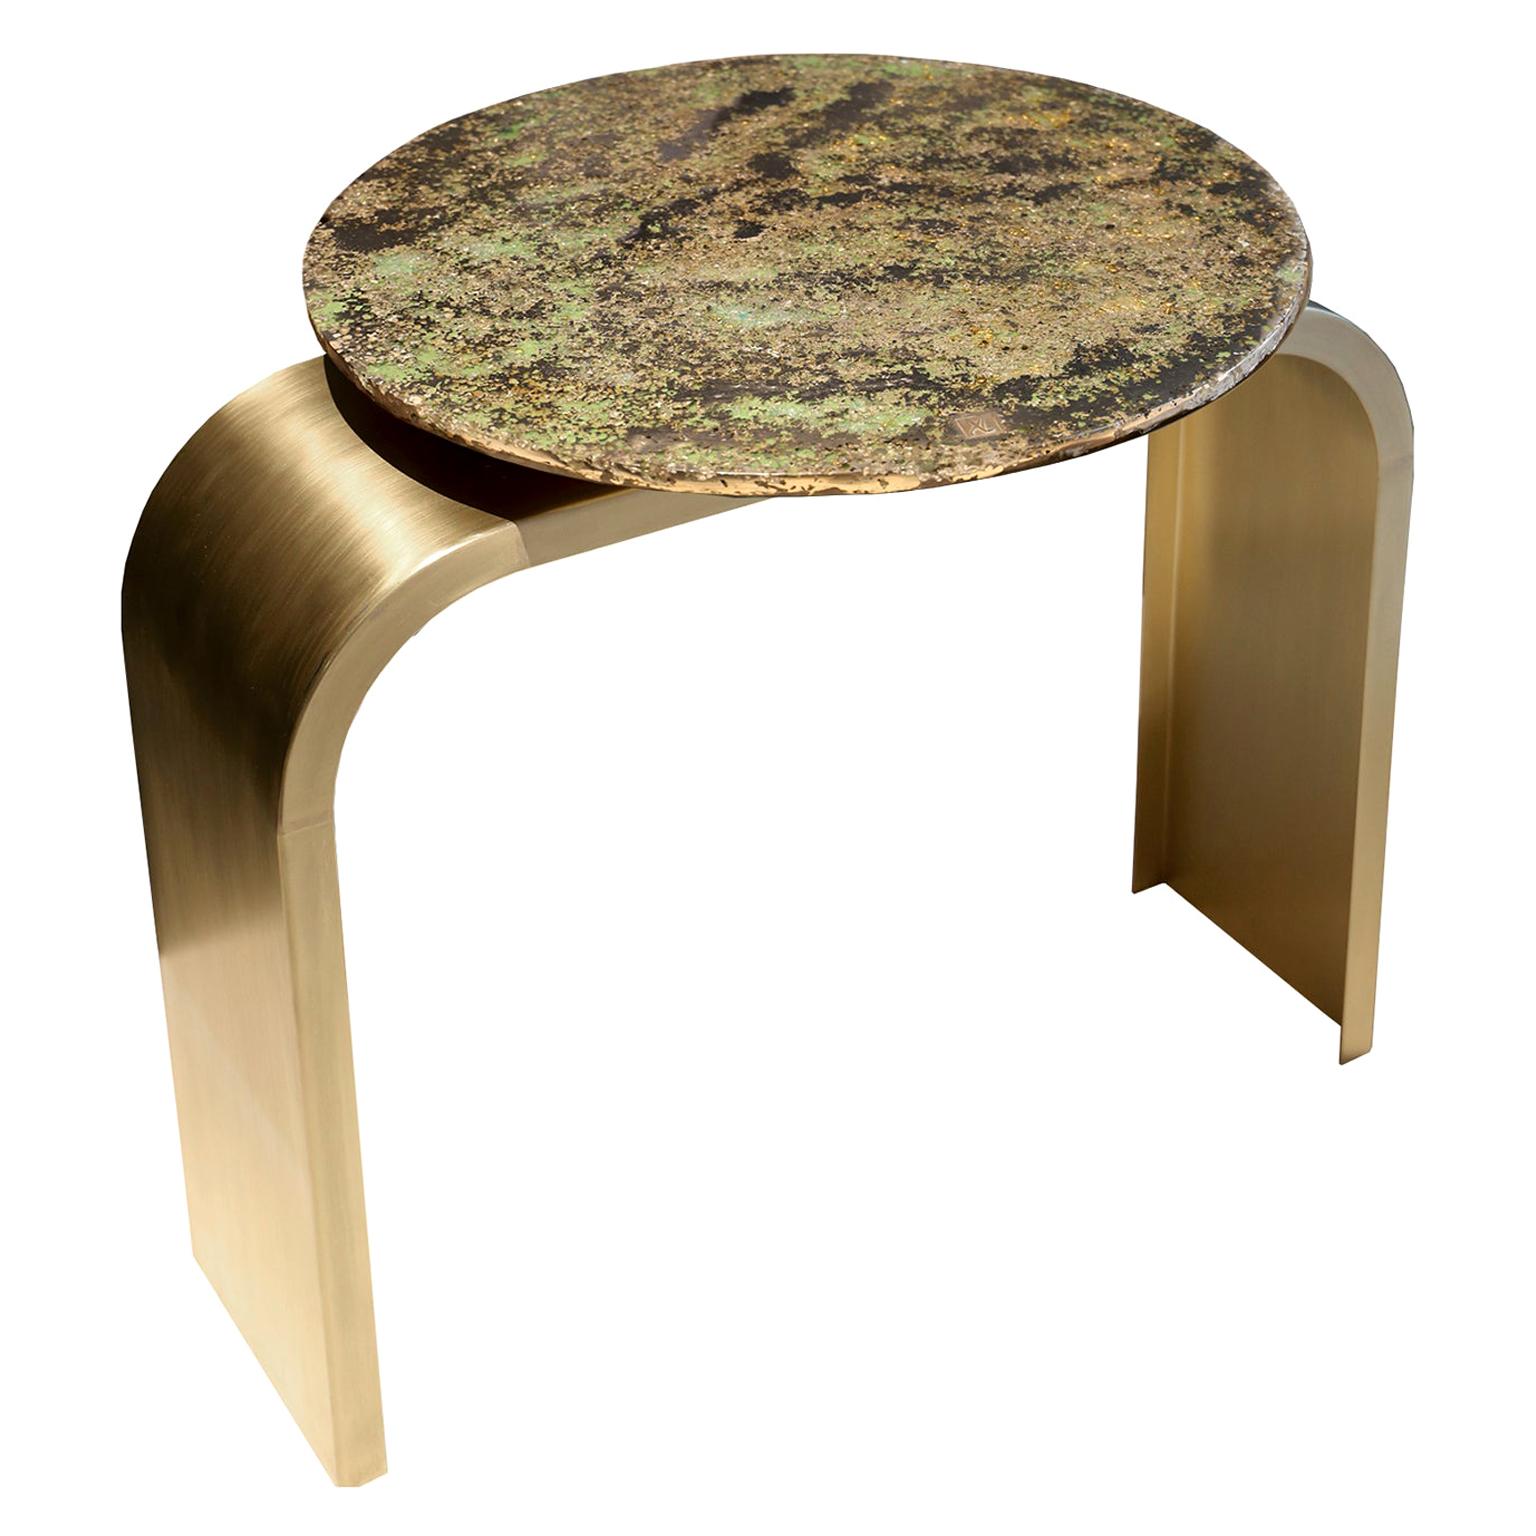 Console Table "Bridge legs green", Melted Pewter, Murano Glass, Crystal Resin For Sale